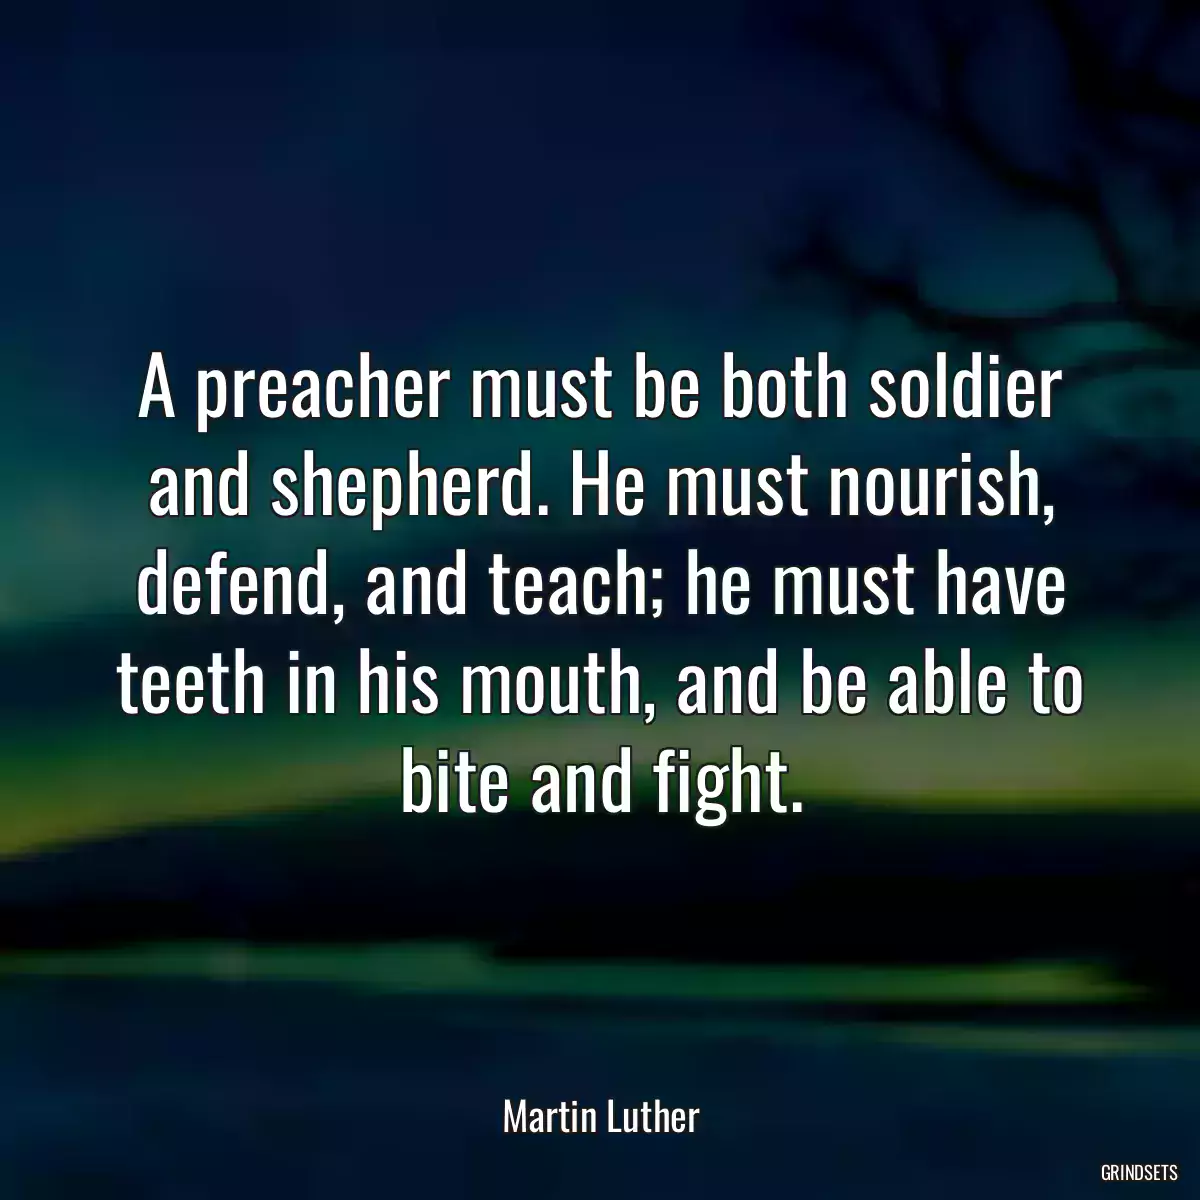 A preacher must be both soldier and shepherd. He must nourish, defend, and teach; he must have teeth in his mouth, and be able to bite and fight.